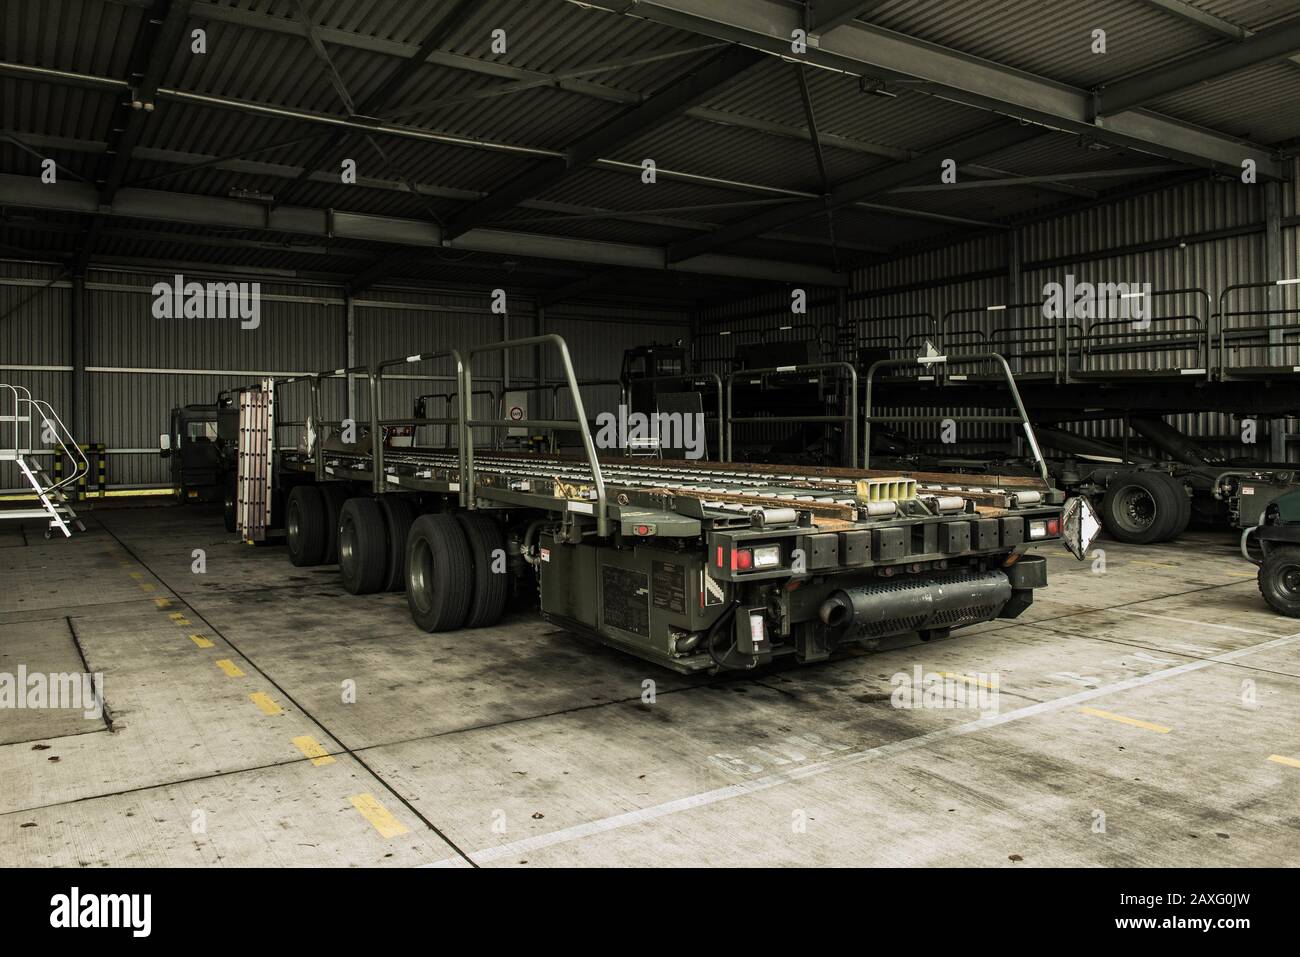 Daily inspections are required on a 60k Tunner loader at Ramstein Air Base, Germany. Feb. 5, 2020. The Tunner has a 60,000 pound carrying capacity which assists in the transport of pallets to and from aircraft. (U.S. Air Force photo by Airman 1st Class Andrew J. Alvarado) Stock Photo